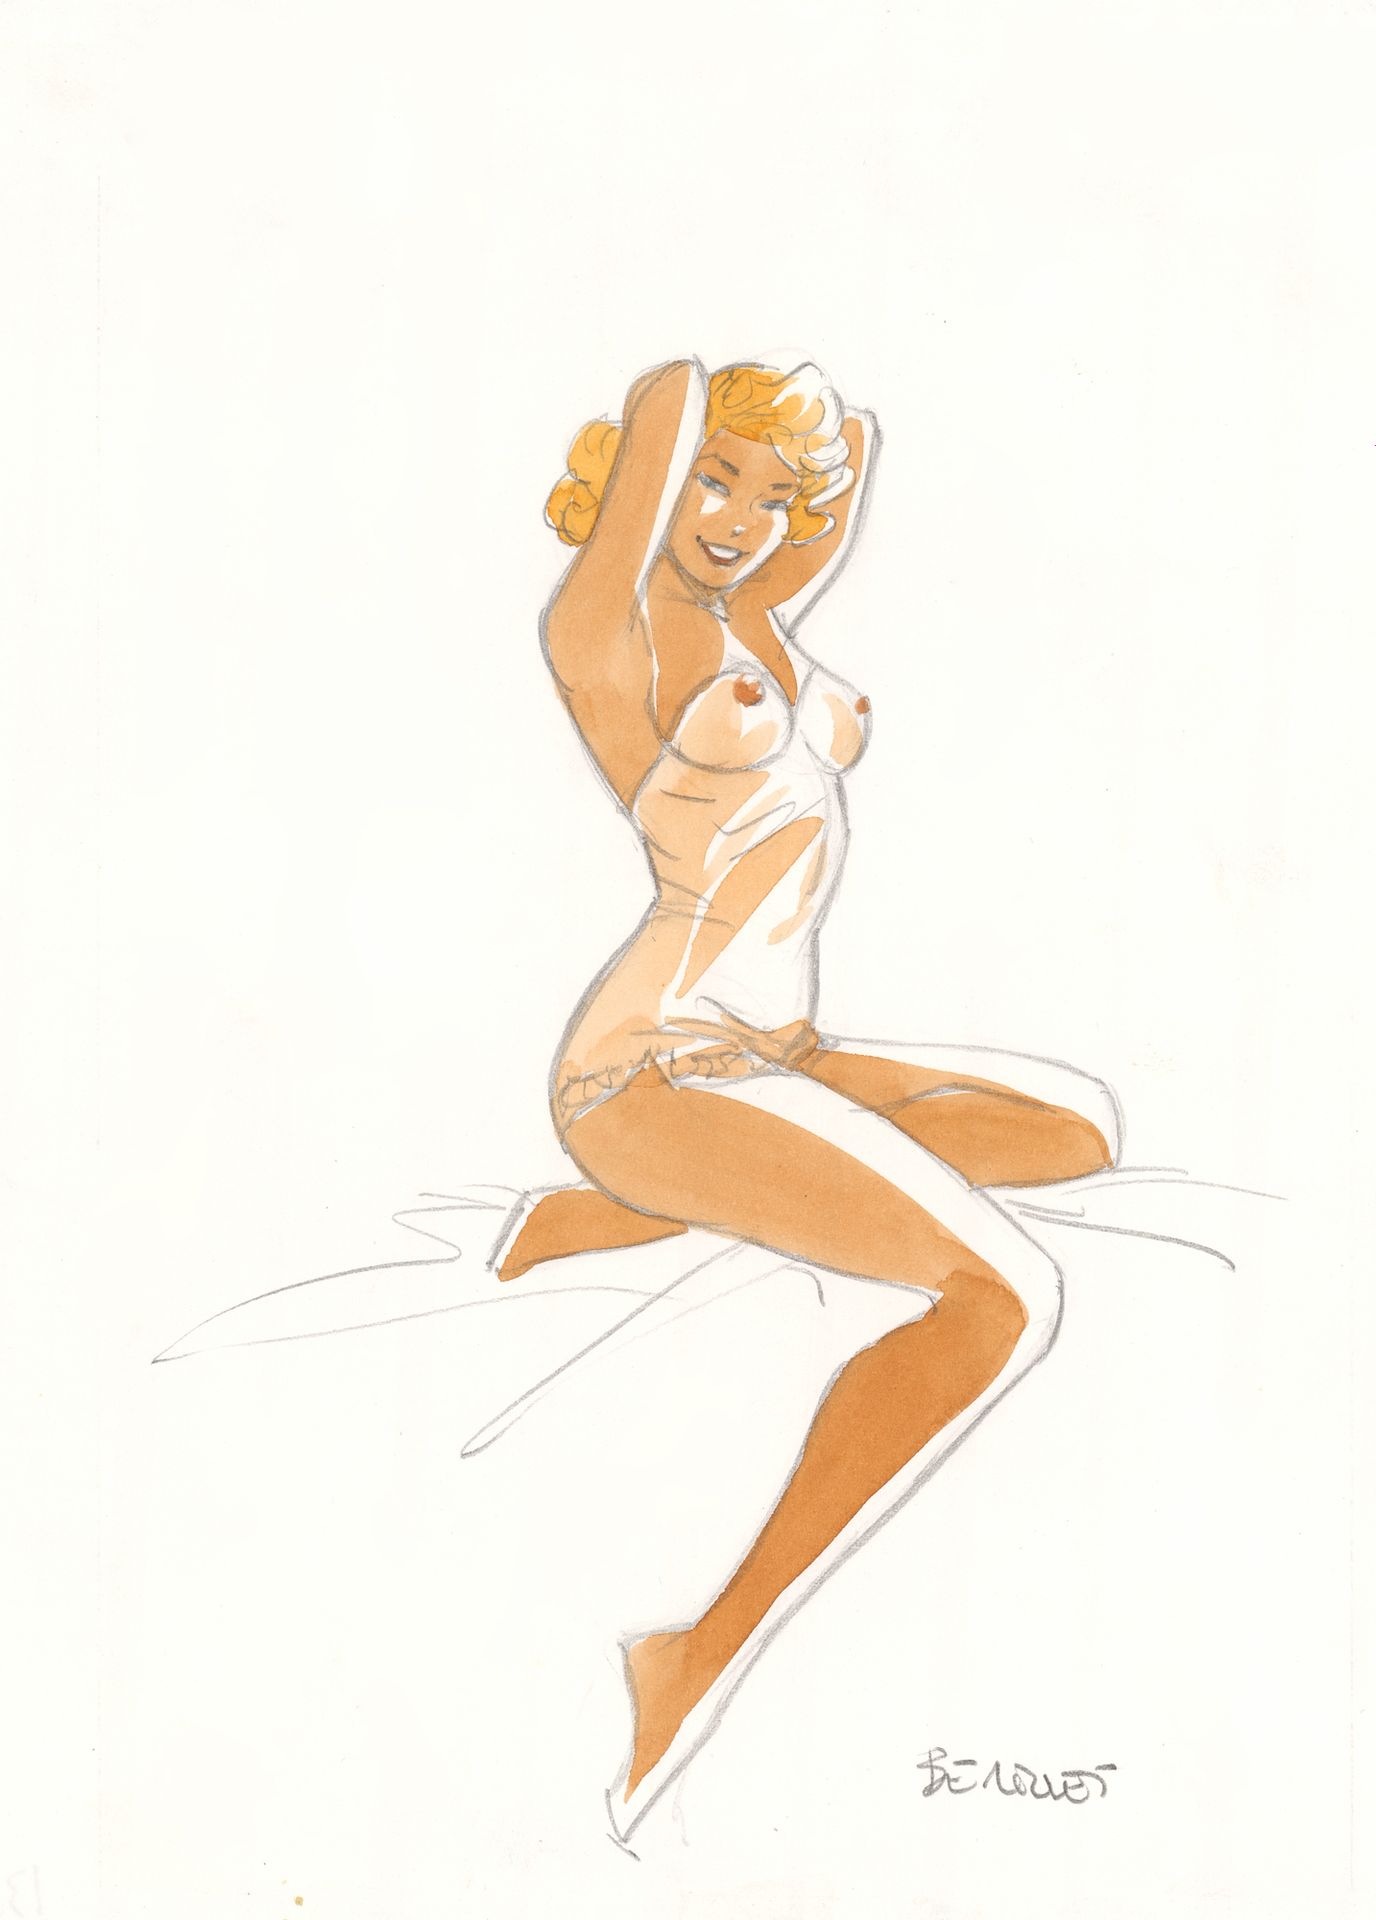 Philippe BERTHET (né en 1956) * Set of 4 sketches
Graphite and colored inks on p&hellip;